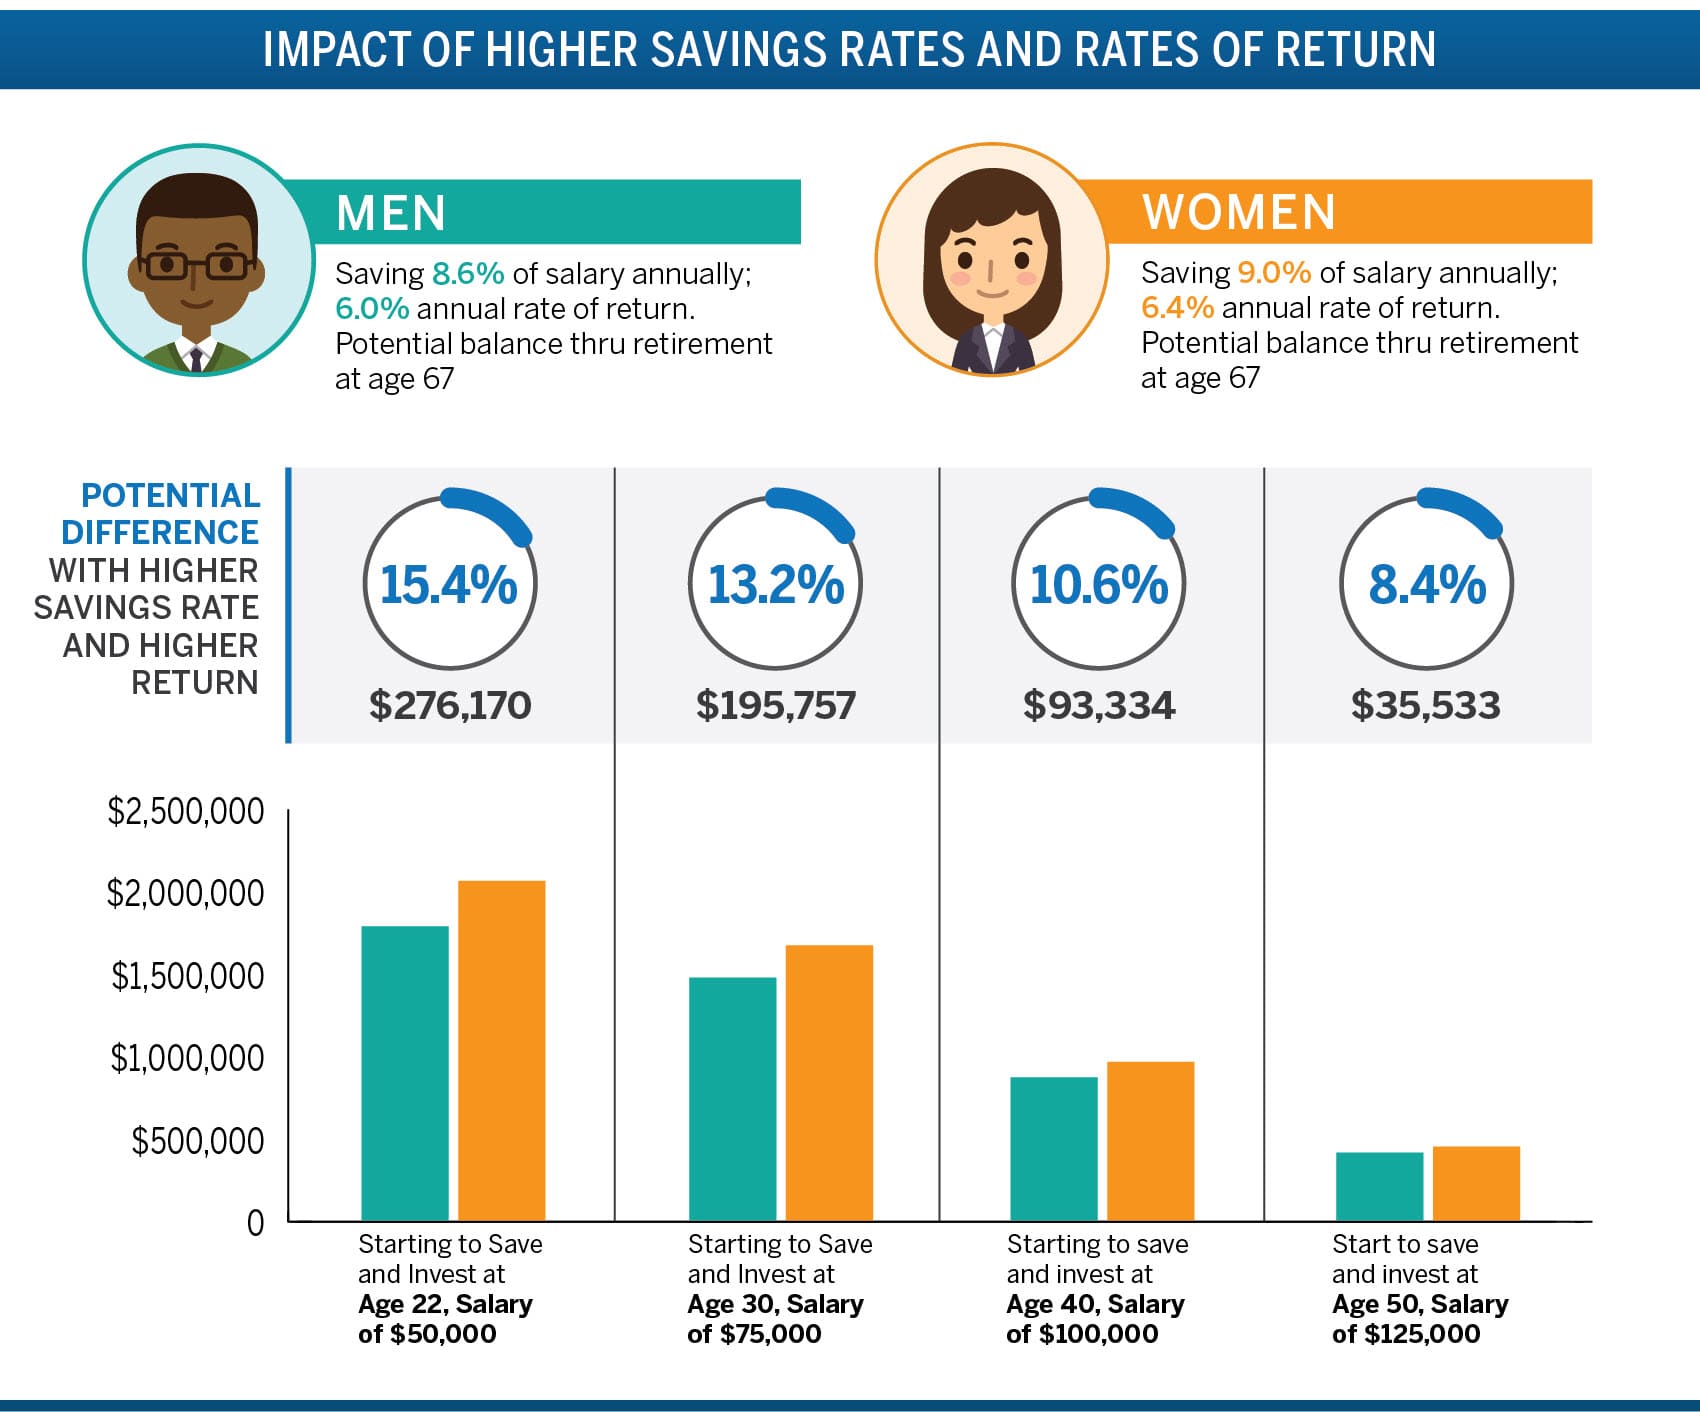 An infographic that compares the financial results of men and women in investing